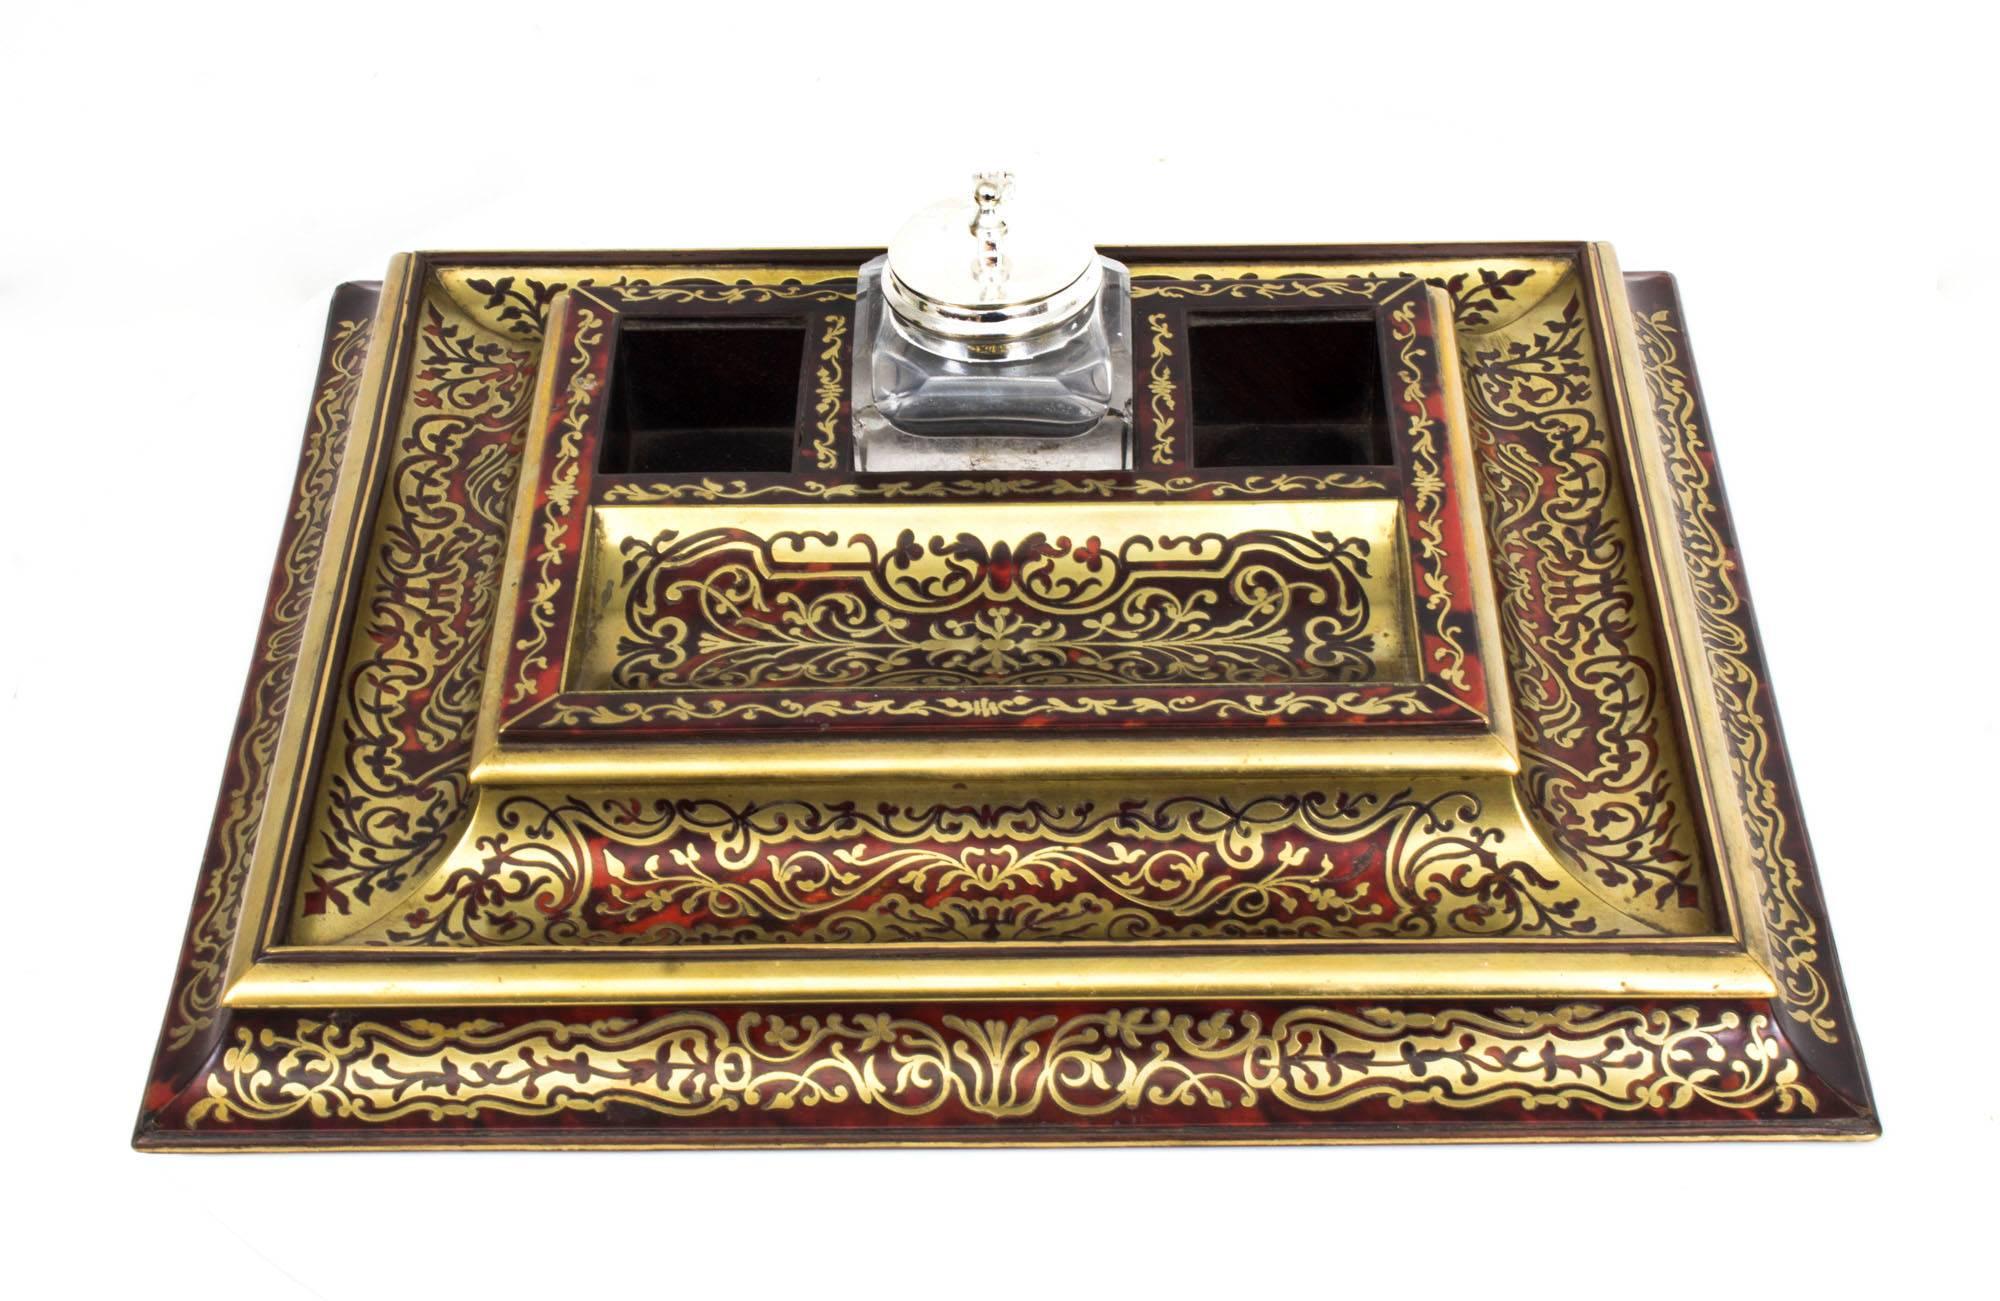 This is an absolutely stunning antique French Boulle & cut brass inkstand circa 1860 in date. 

It is expertly inlaid with foliate stylised foliage decoration in cut brass,
There is a beautiful quill tray which provides ample storage for your